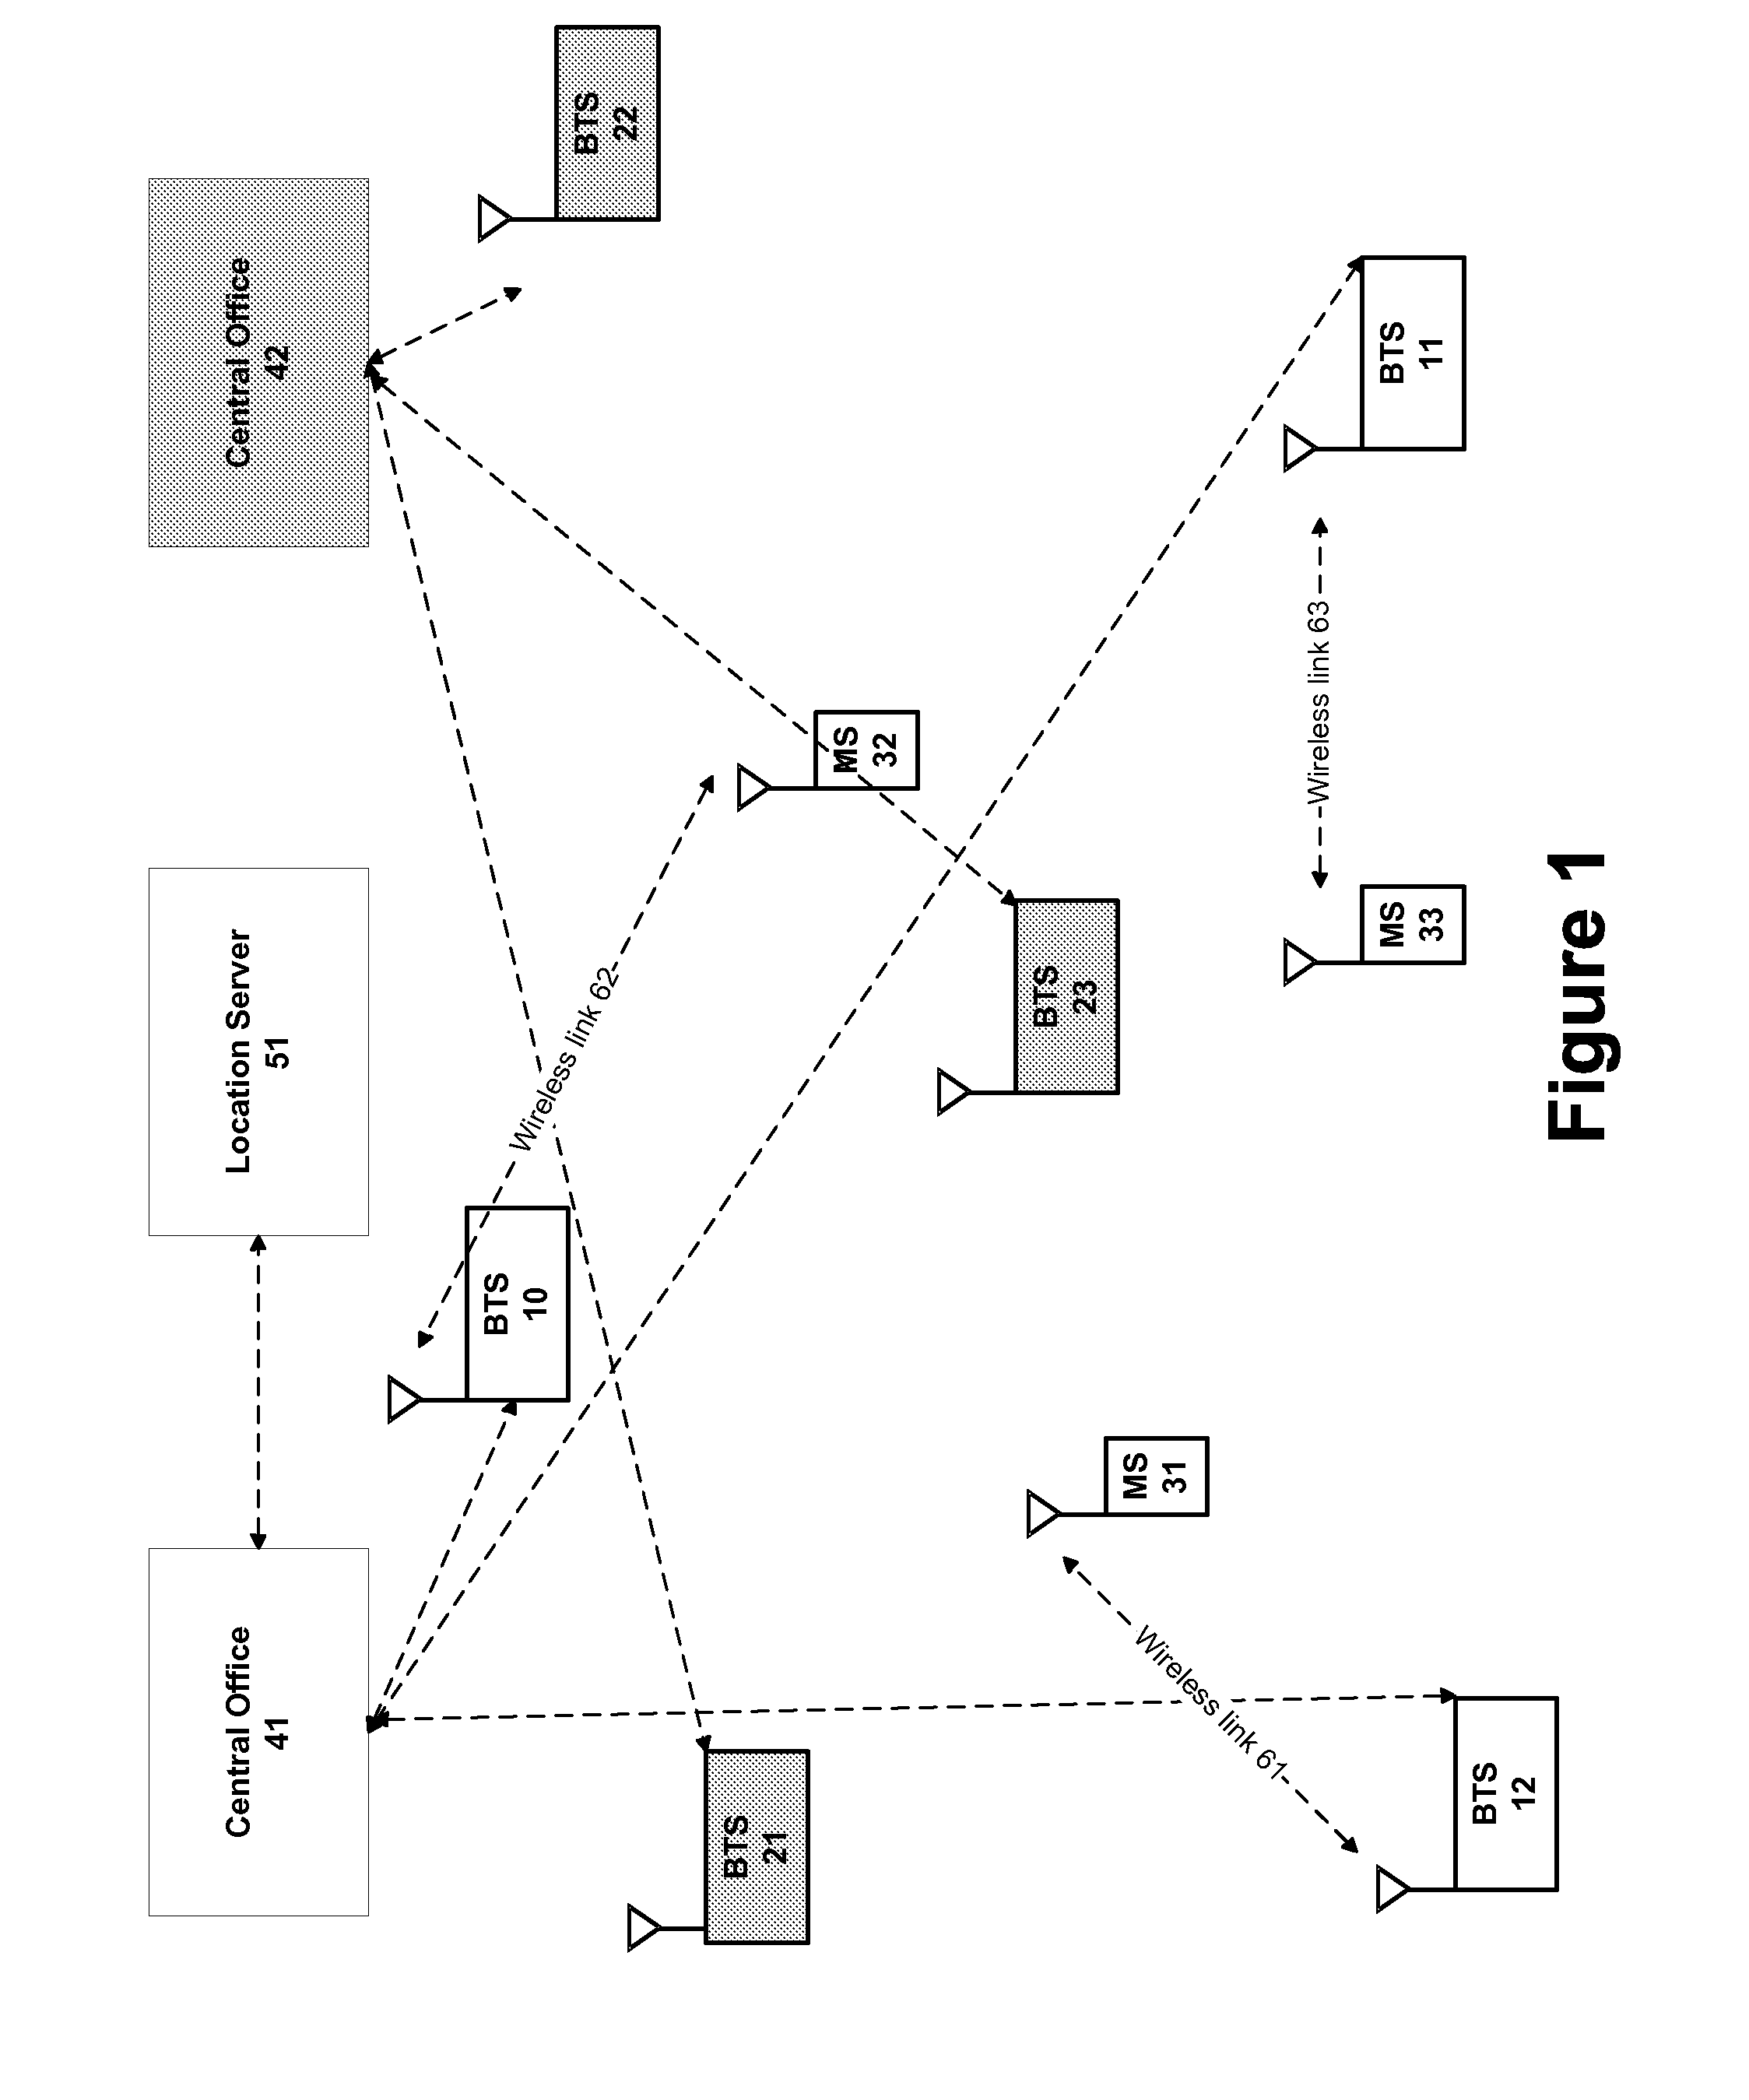 Subscriptionless location of wireless devices